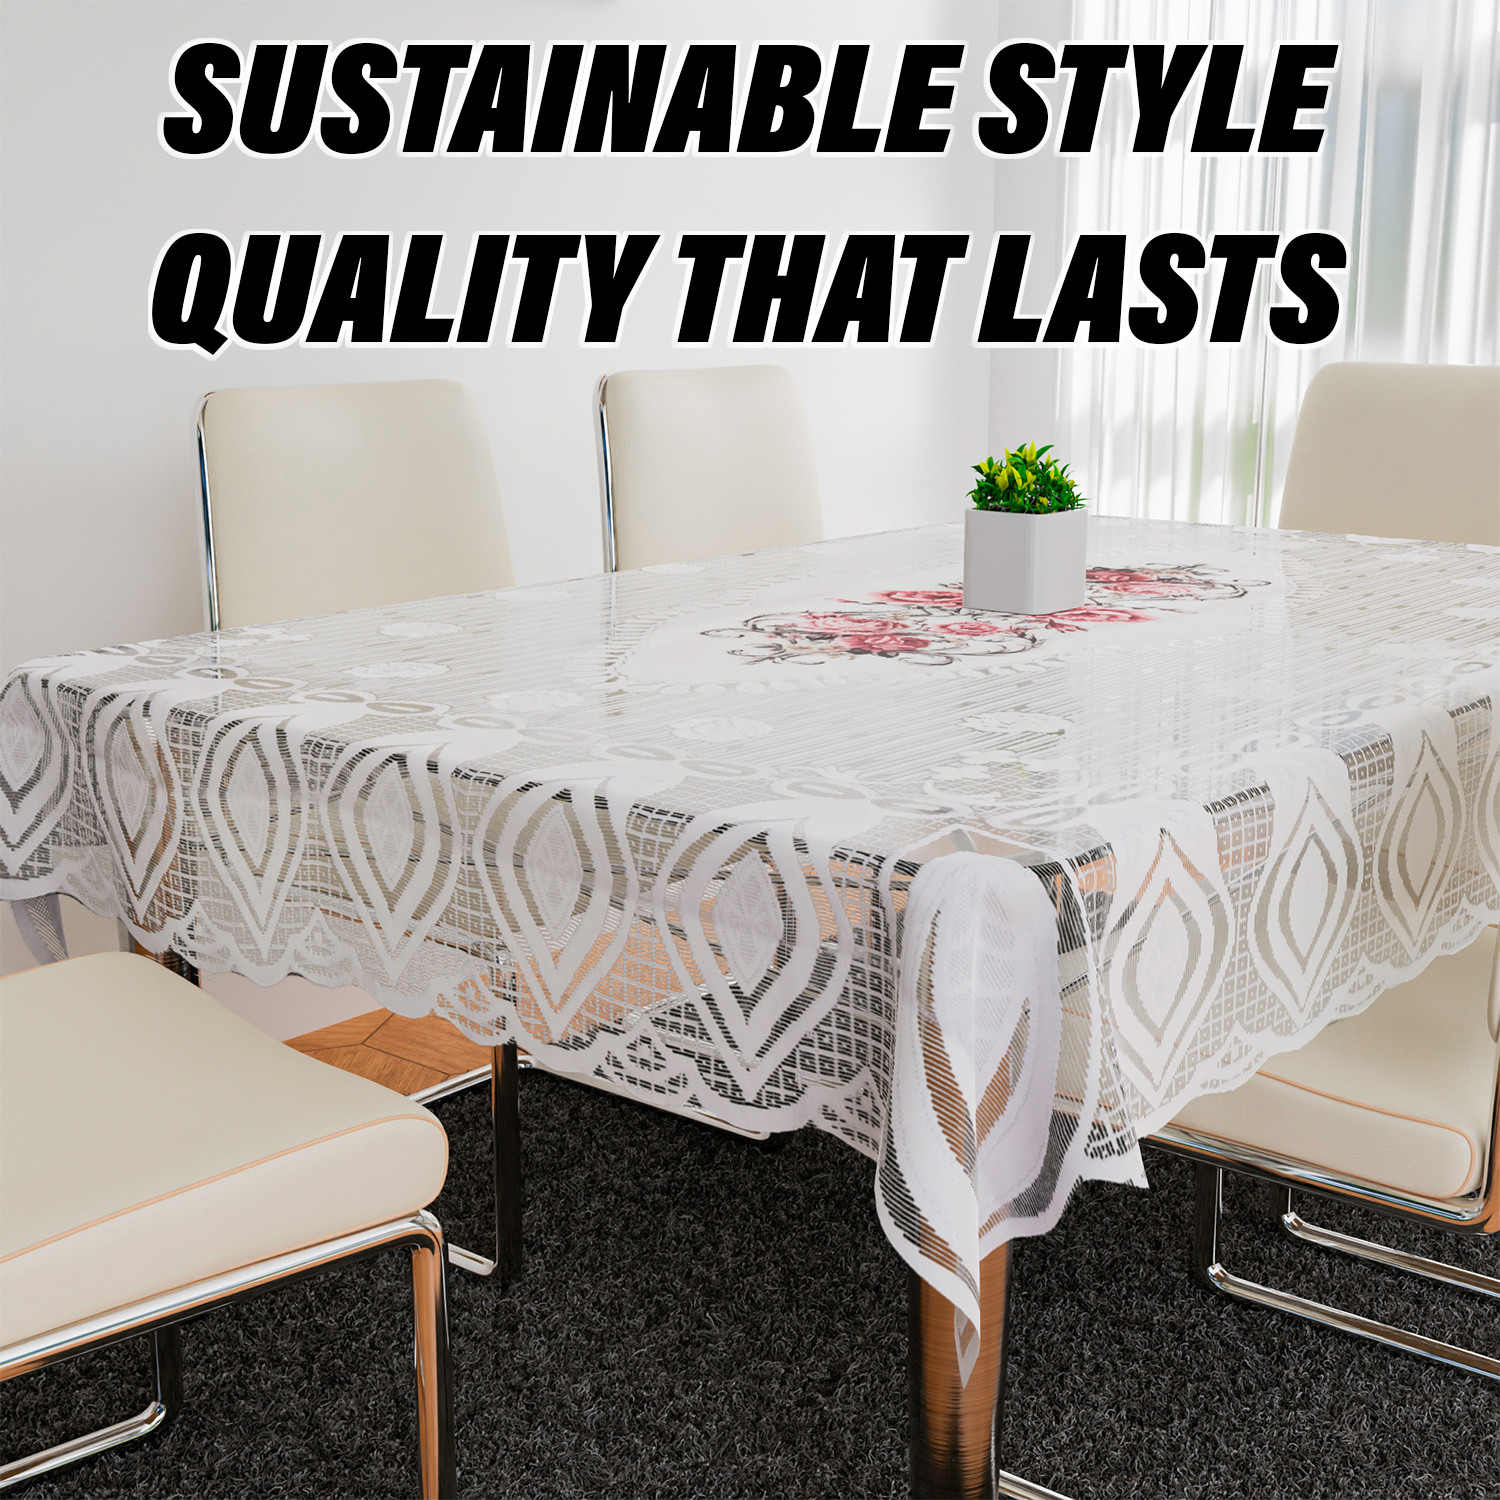 Kuber Industries Dining Table Cover | Cotton Table Cloth Cover | 6-Seater Table Cloth | Glory Table Cover | Table Protector | Table Cover for Dining Table | 60x90 Inch | DTC | White & Pink